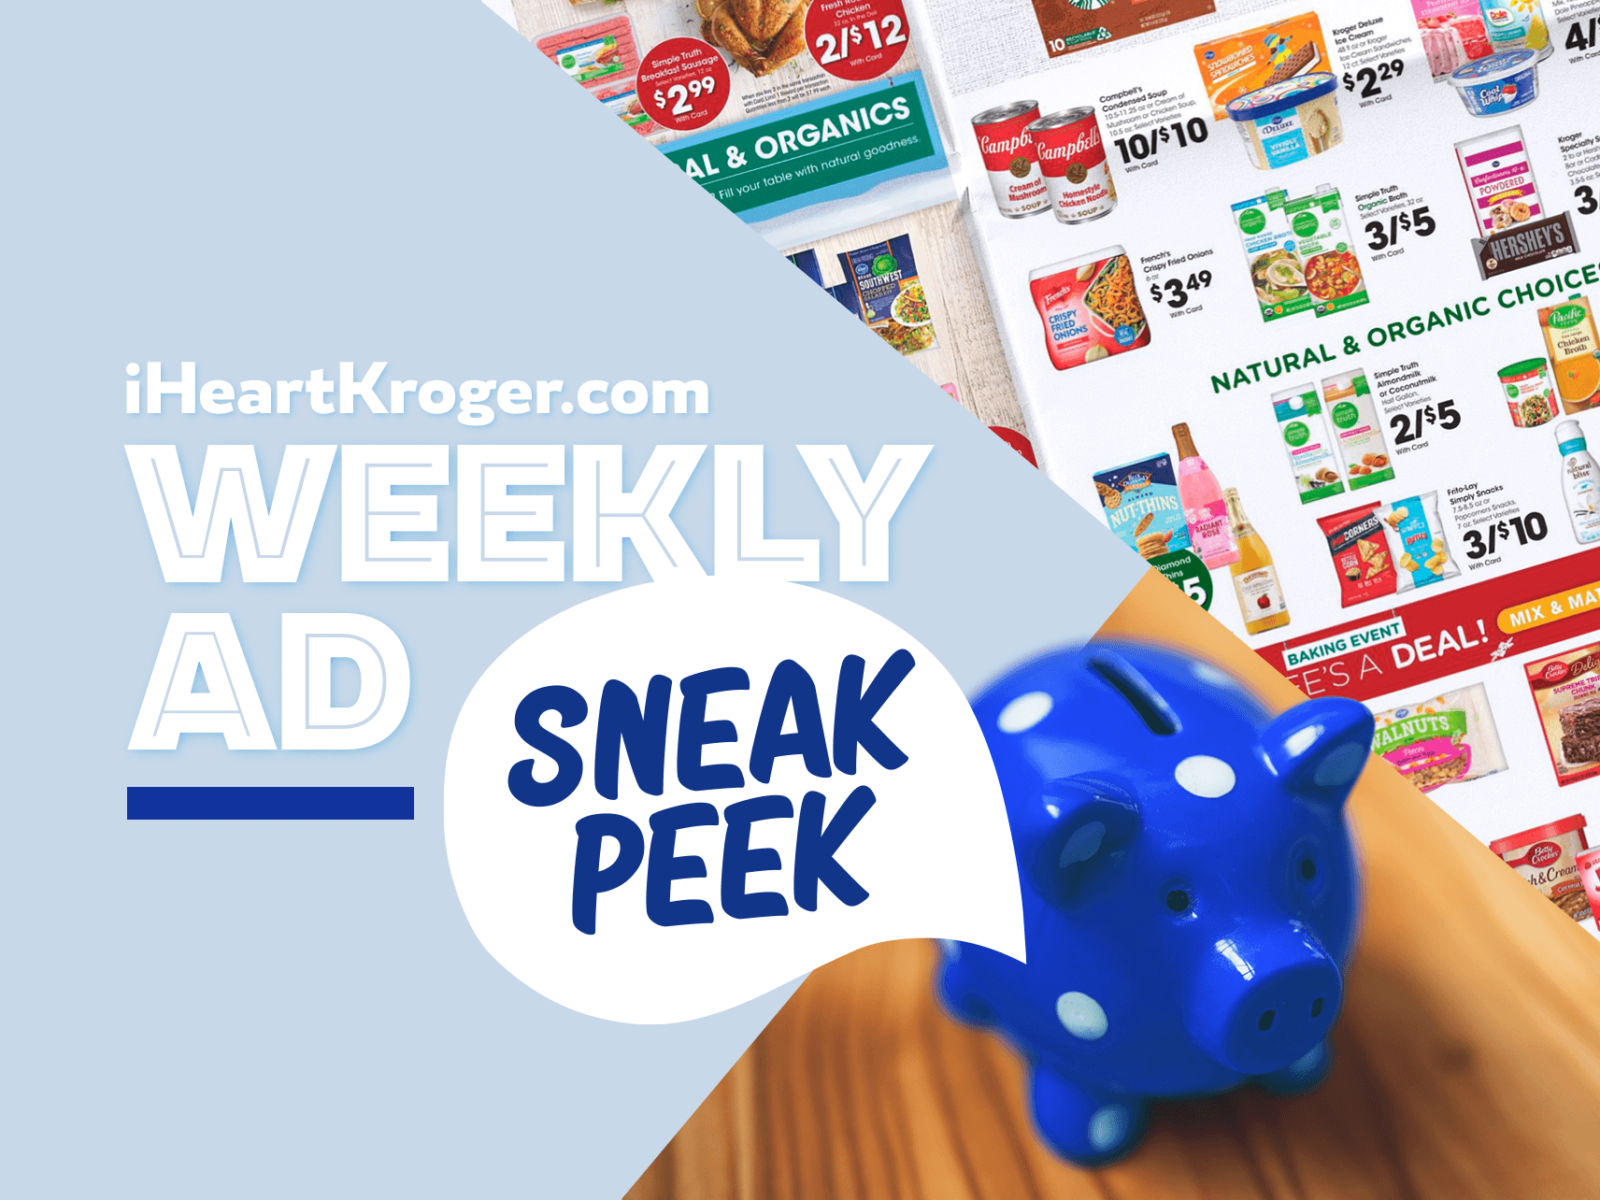 Kroger Ad & Coupons Week Of 6/5 to 6/11 – Mega Sale Continues!